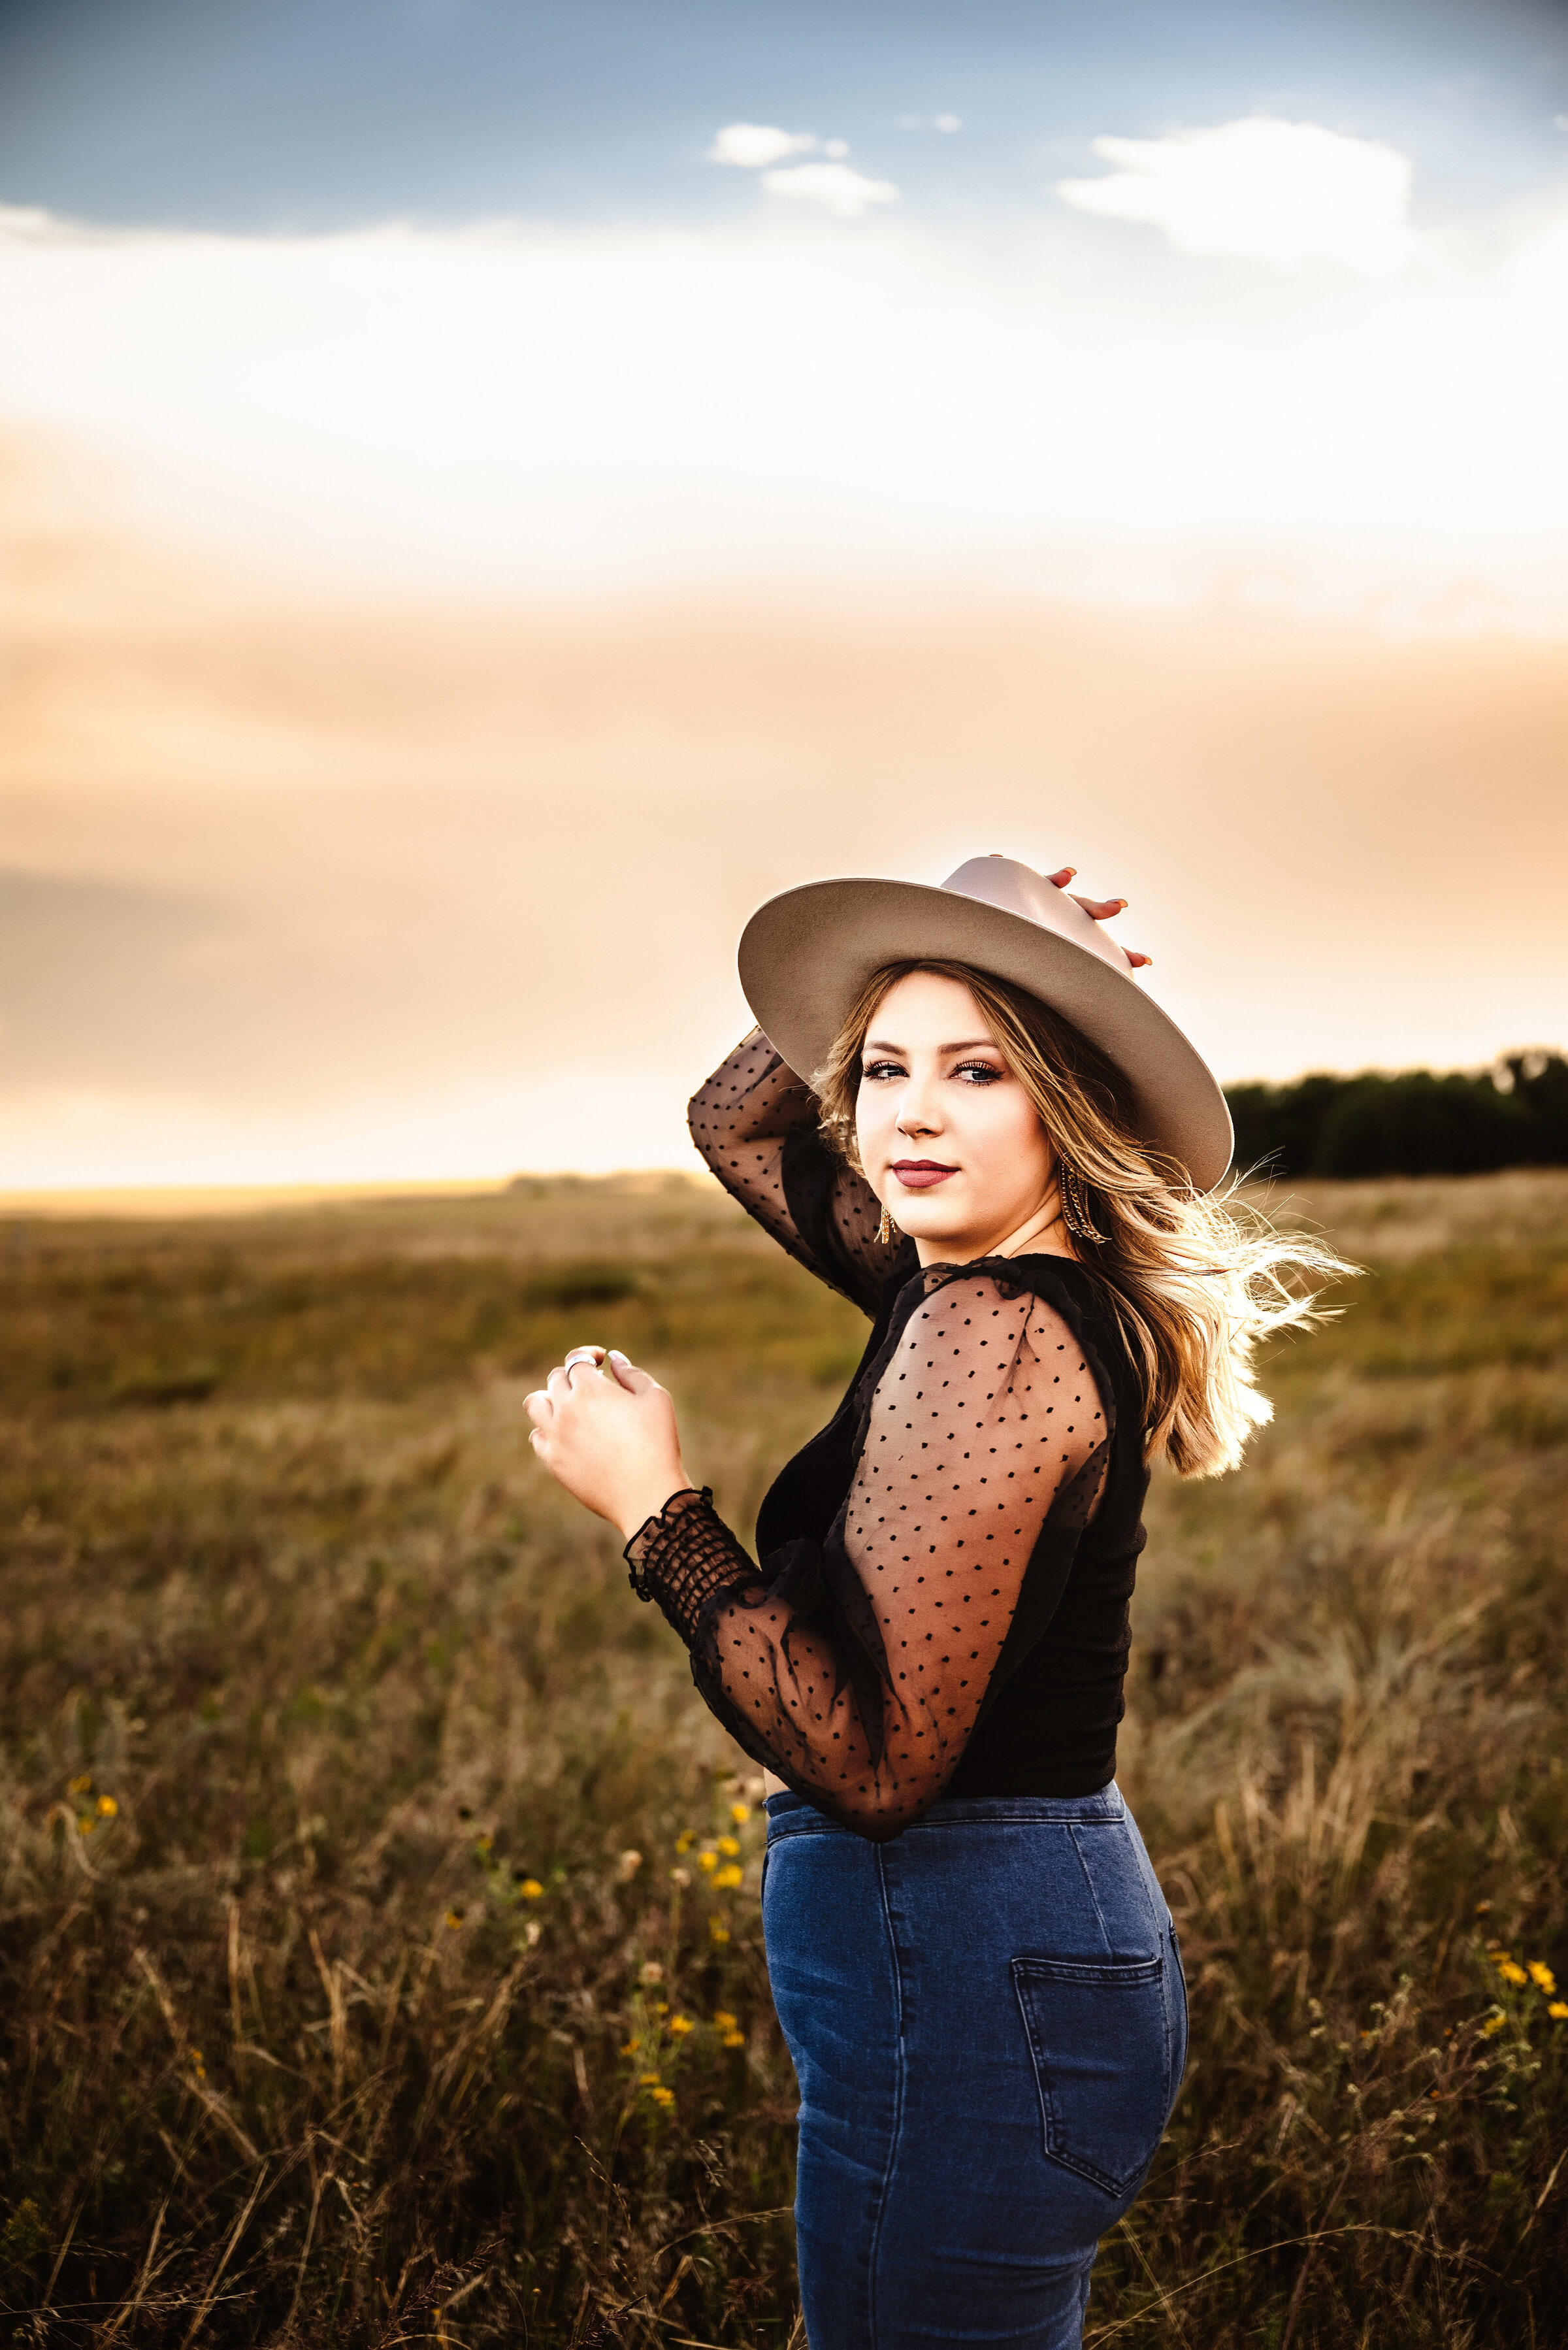 Senior girl holds onto hat while wind blows her hair in open field